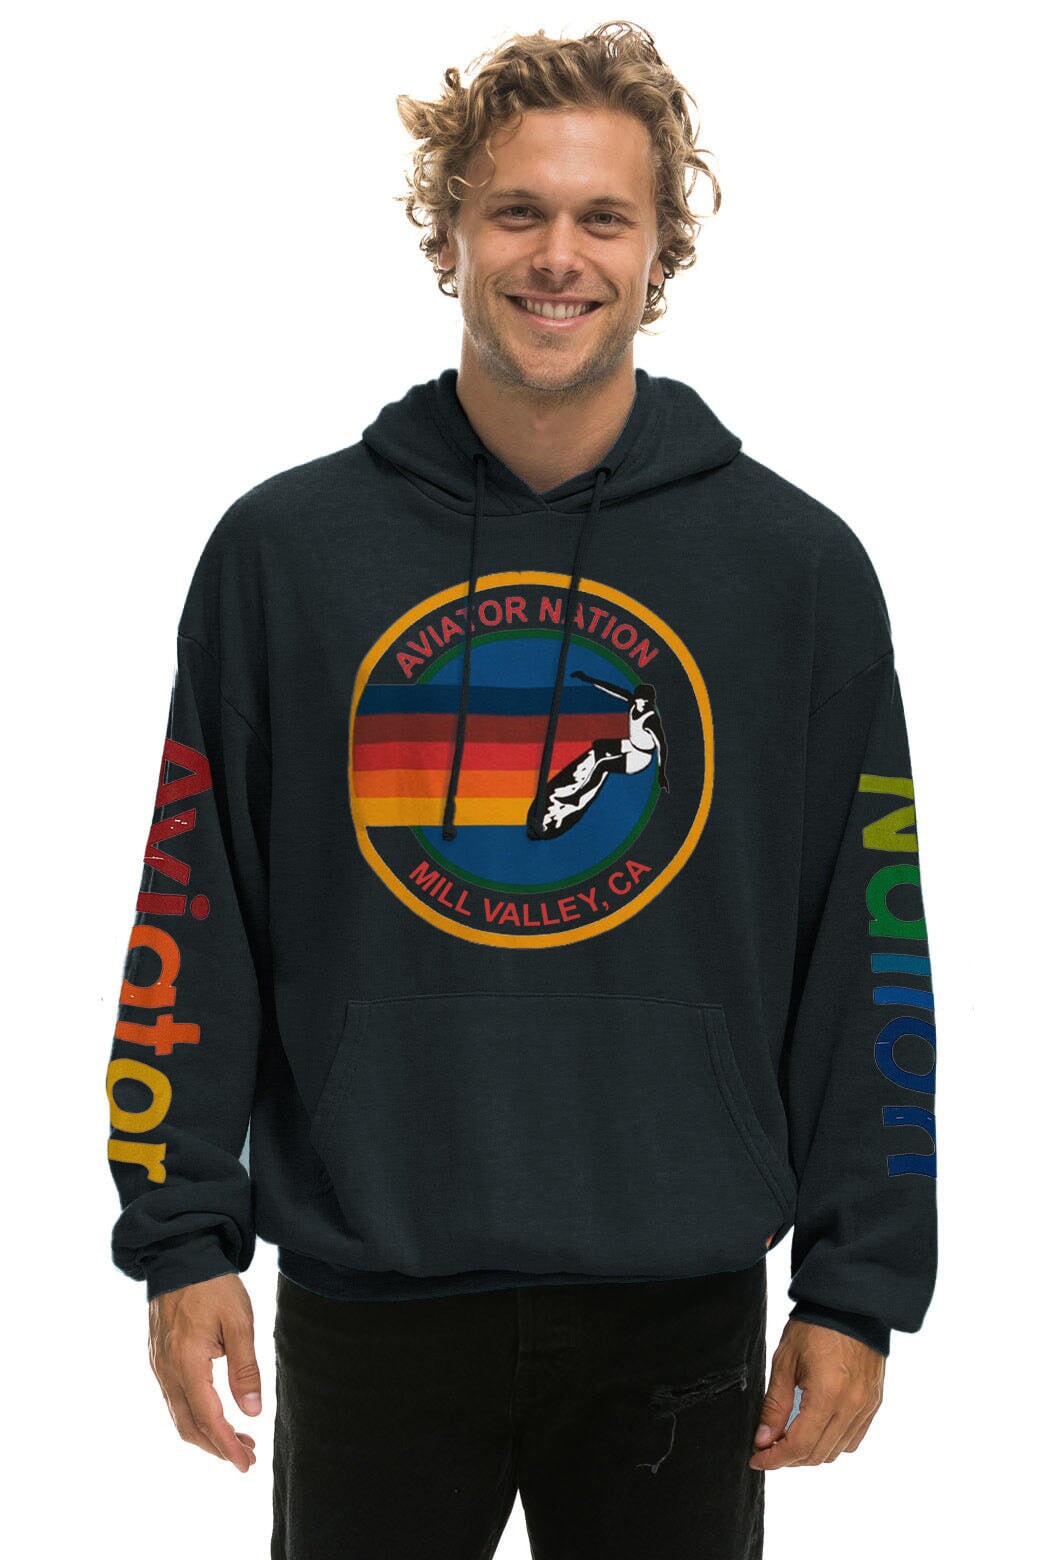 AVIATOR NATION MILL VALLEY RELAXED PULLOVER HOODIE - CHARCOAL Hoodie Aviator Nation 